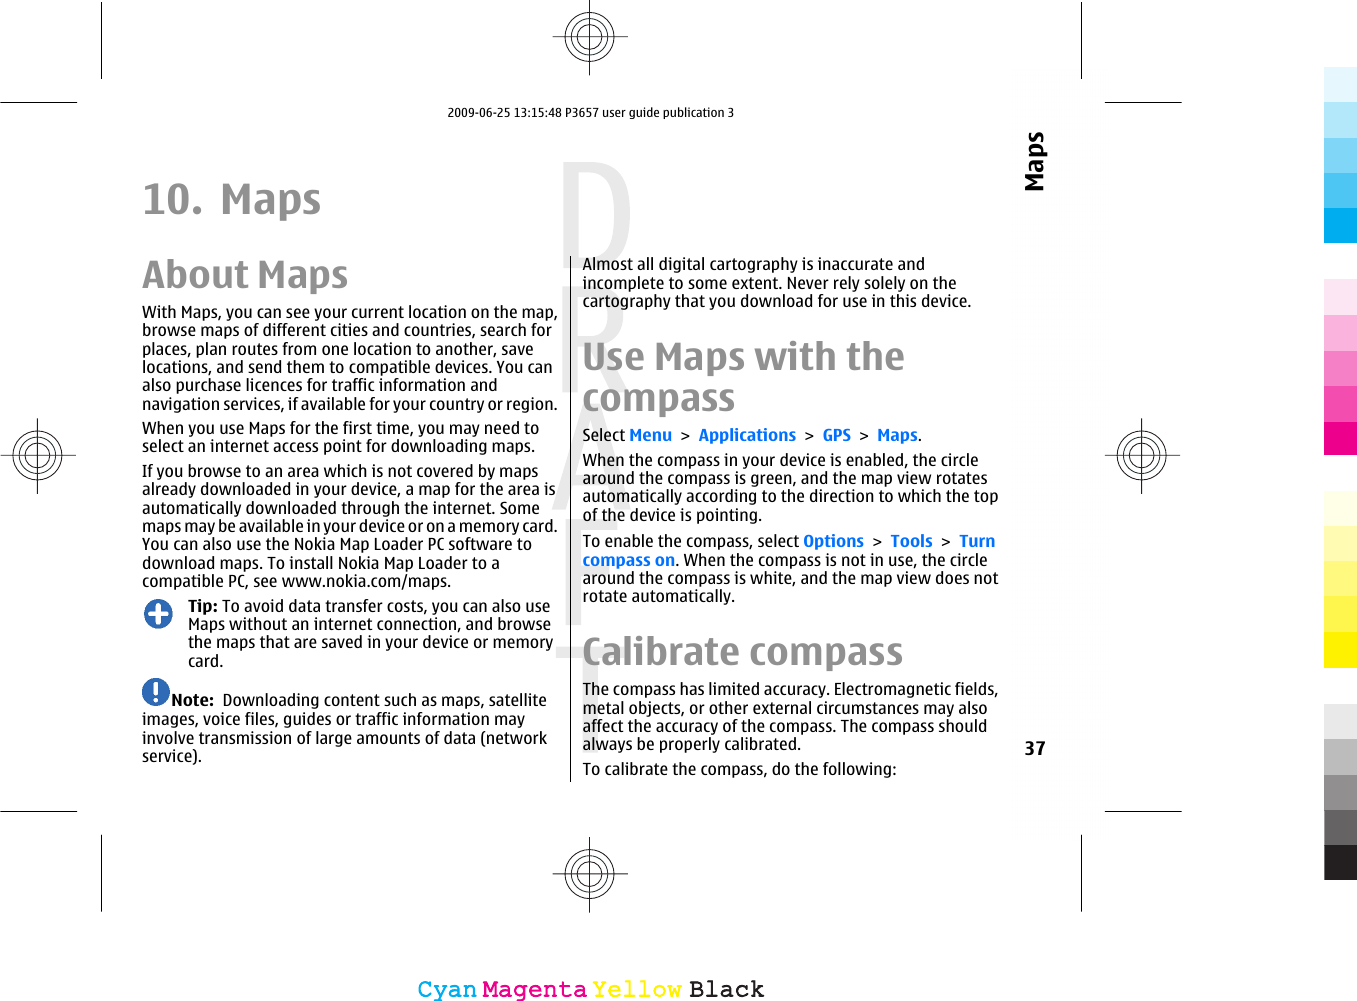 10. MapsAbout MapsWith Maps, you can see your current location on the map,browse maps of different cities and countries, search forplaces, plan routes from one location to another, savelocations, and send them to compatible devices. You canalso purchase licences for traffic information andnavigation services, if available for your country or region.When you use Maps for the first time, you may need toselect an internet access point for downloading maps.If you browse to an area which is not covered by mapsalready downloaded in your device, a map for the area isautomatically downloaded through the internet. Somemaps may be available in your device or on a memory card.You can also use the Nokia Map Loader PC software todownload maps. To install Nokia Map Loader to acompatible PC, see www.nokia.com/maps.Tip: To avoid data transfer costs, you can also useMaps without an internet connection, and browsethe maps that are saved in your device or memorycard.Note:  Downloading content such as maps, satelliteimages, voice files, guides or traffic information mayinvolve transmission of large amounts of data (networkservice).Almost all digital cartography is inaccurate andincomplete to some extent. Never rely solely on thecartography that you download for use in this device.Use Maps with thecompassSelect Menu &gt; Applications &gt; GPS &gt; Maps.When the compass in your device is enabled, the circlearound the compass is green, and the map view rotatesautomatically according to the direction to which the topof the device is pointing.To enable the compass, select Options &gt; Tools &gt; Turncompass on. When the compass is not in use, the circlearound the compass is white, and the map view does notrotate automatically.Calibrate compassThe compass has limited accuracy. Electromagnetic fields,metal objects, or other external circumstances may alsoaffect the accuracy of the compass. The compass shouldalways be properly calibrated.To calibrate the compass, do the following:37MapsCyanCyanMagentaMagentaYellowYellowBlackBlack2009-06-25 13:15:48 P3657 user guide publication 3